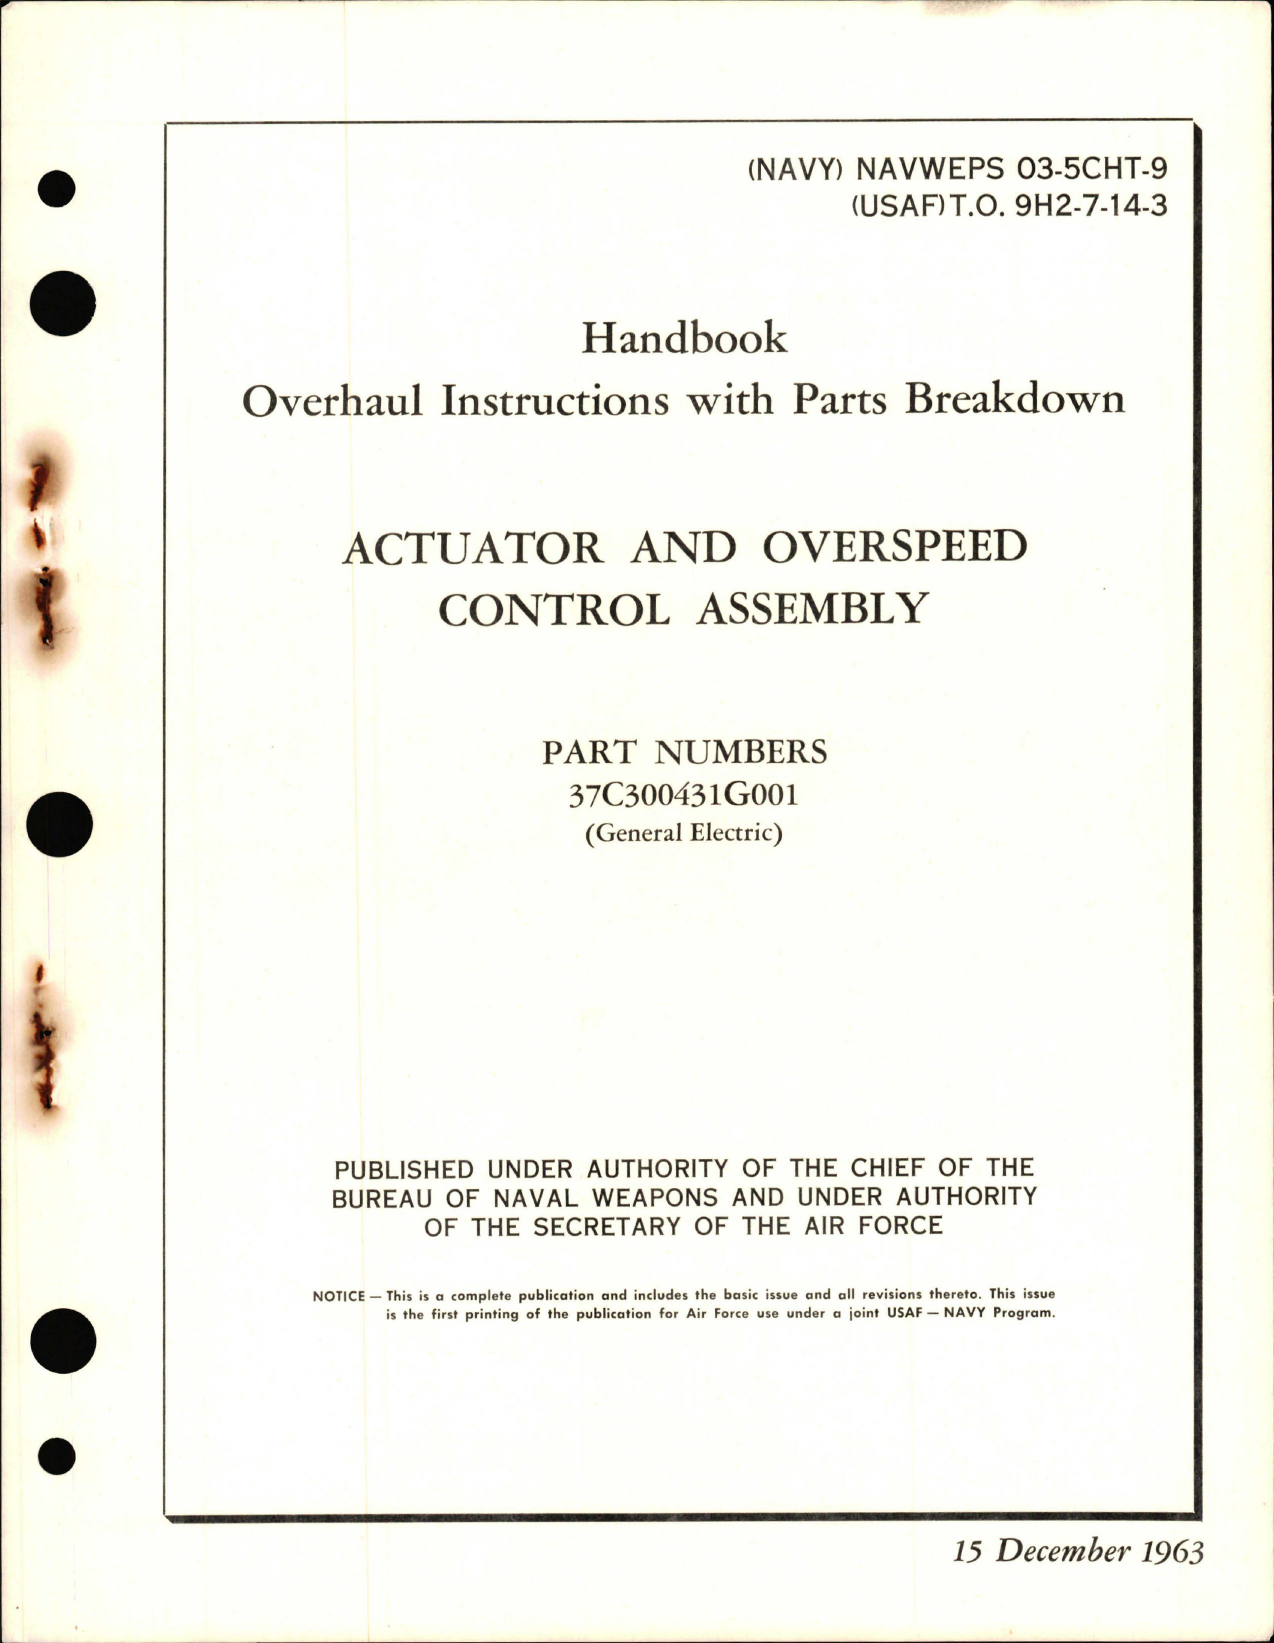 Sample page 1 from AirCorps Library document: Overhaul Instructions with Parts Breakdown for Actuator and Overspeed Control Assembly Part 37C300431G001